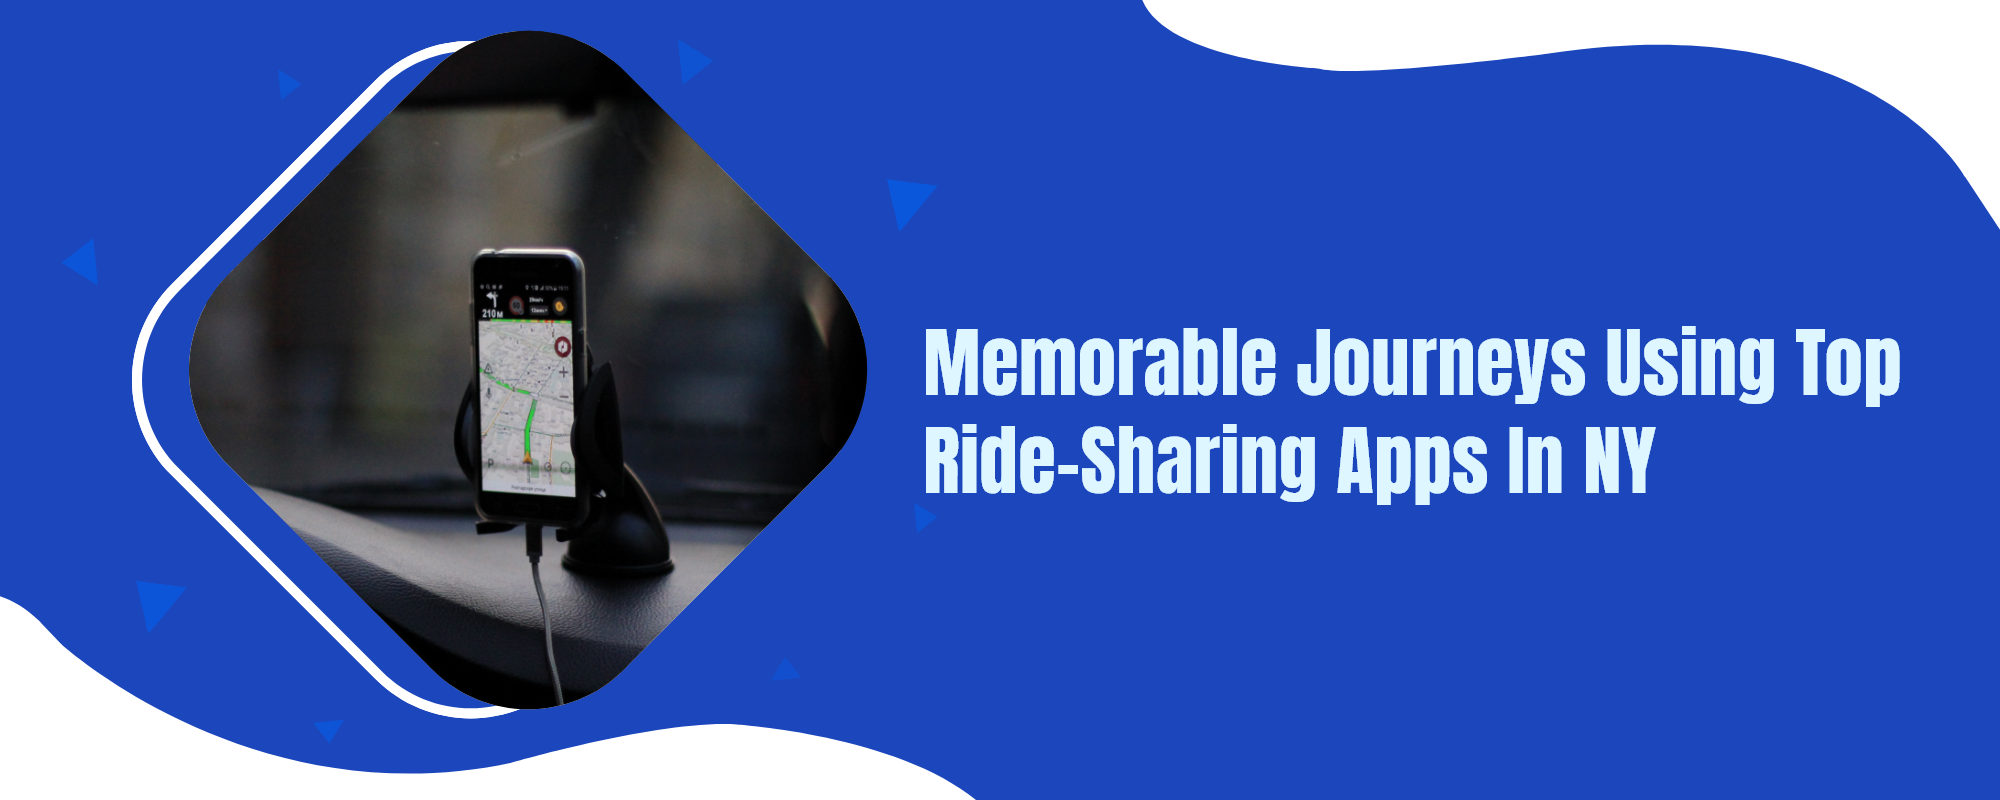 Top ride sharing apps in NY